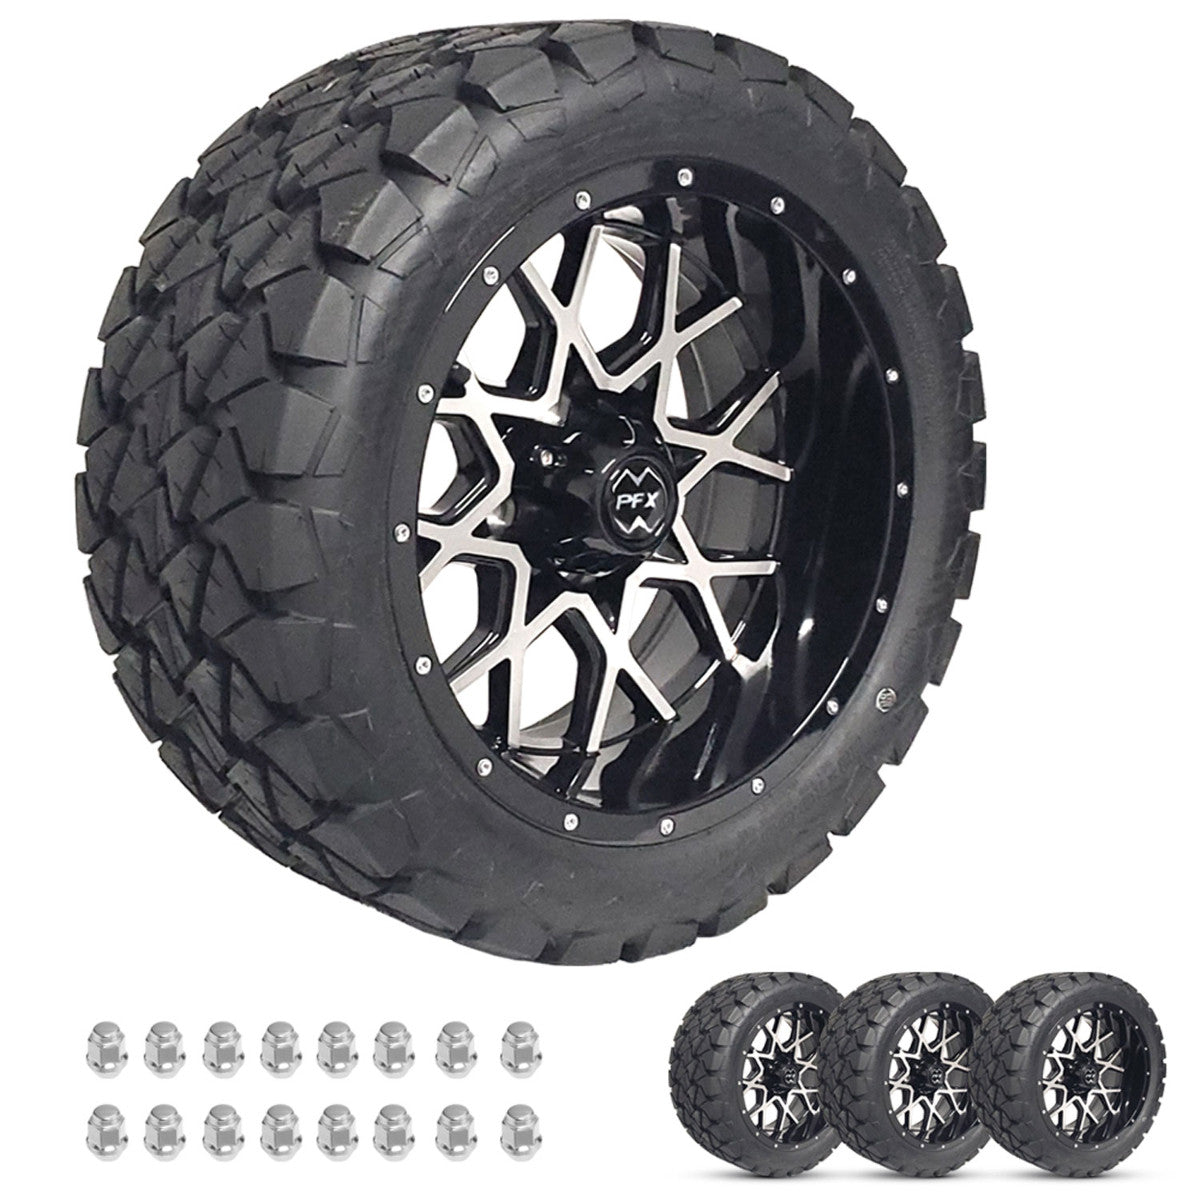 14" CHAOS Machined Black Wheels on 22x10x14 A/T Off-Road Tires - Set of 4